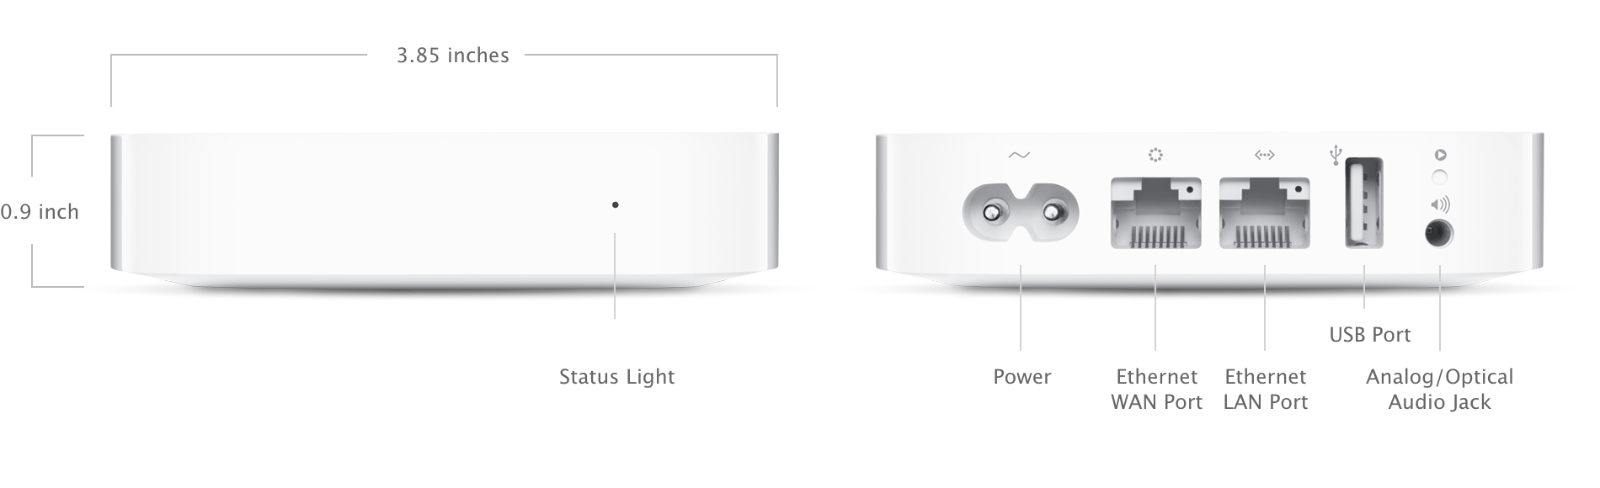 AirPort Express (2nd Generation) - Technical Specifications